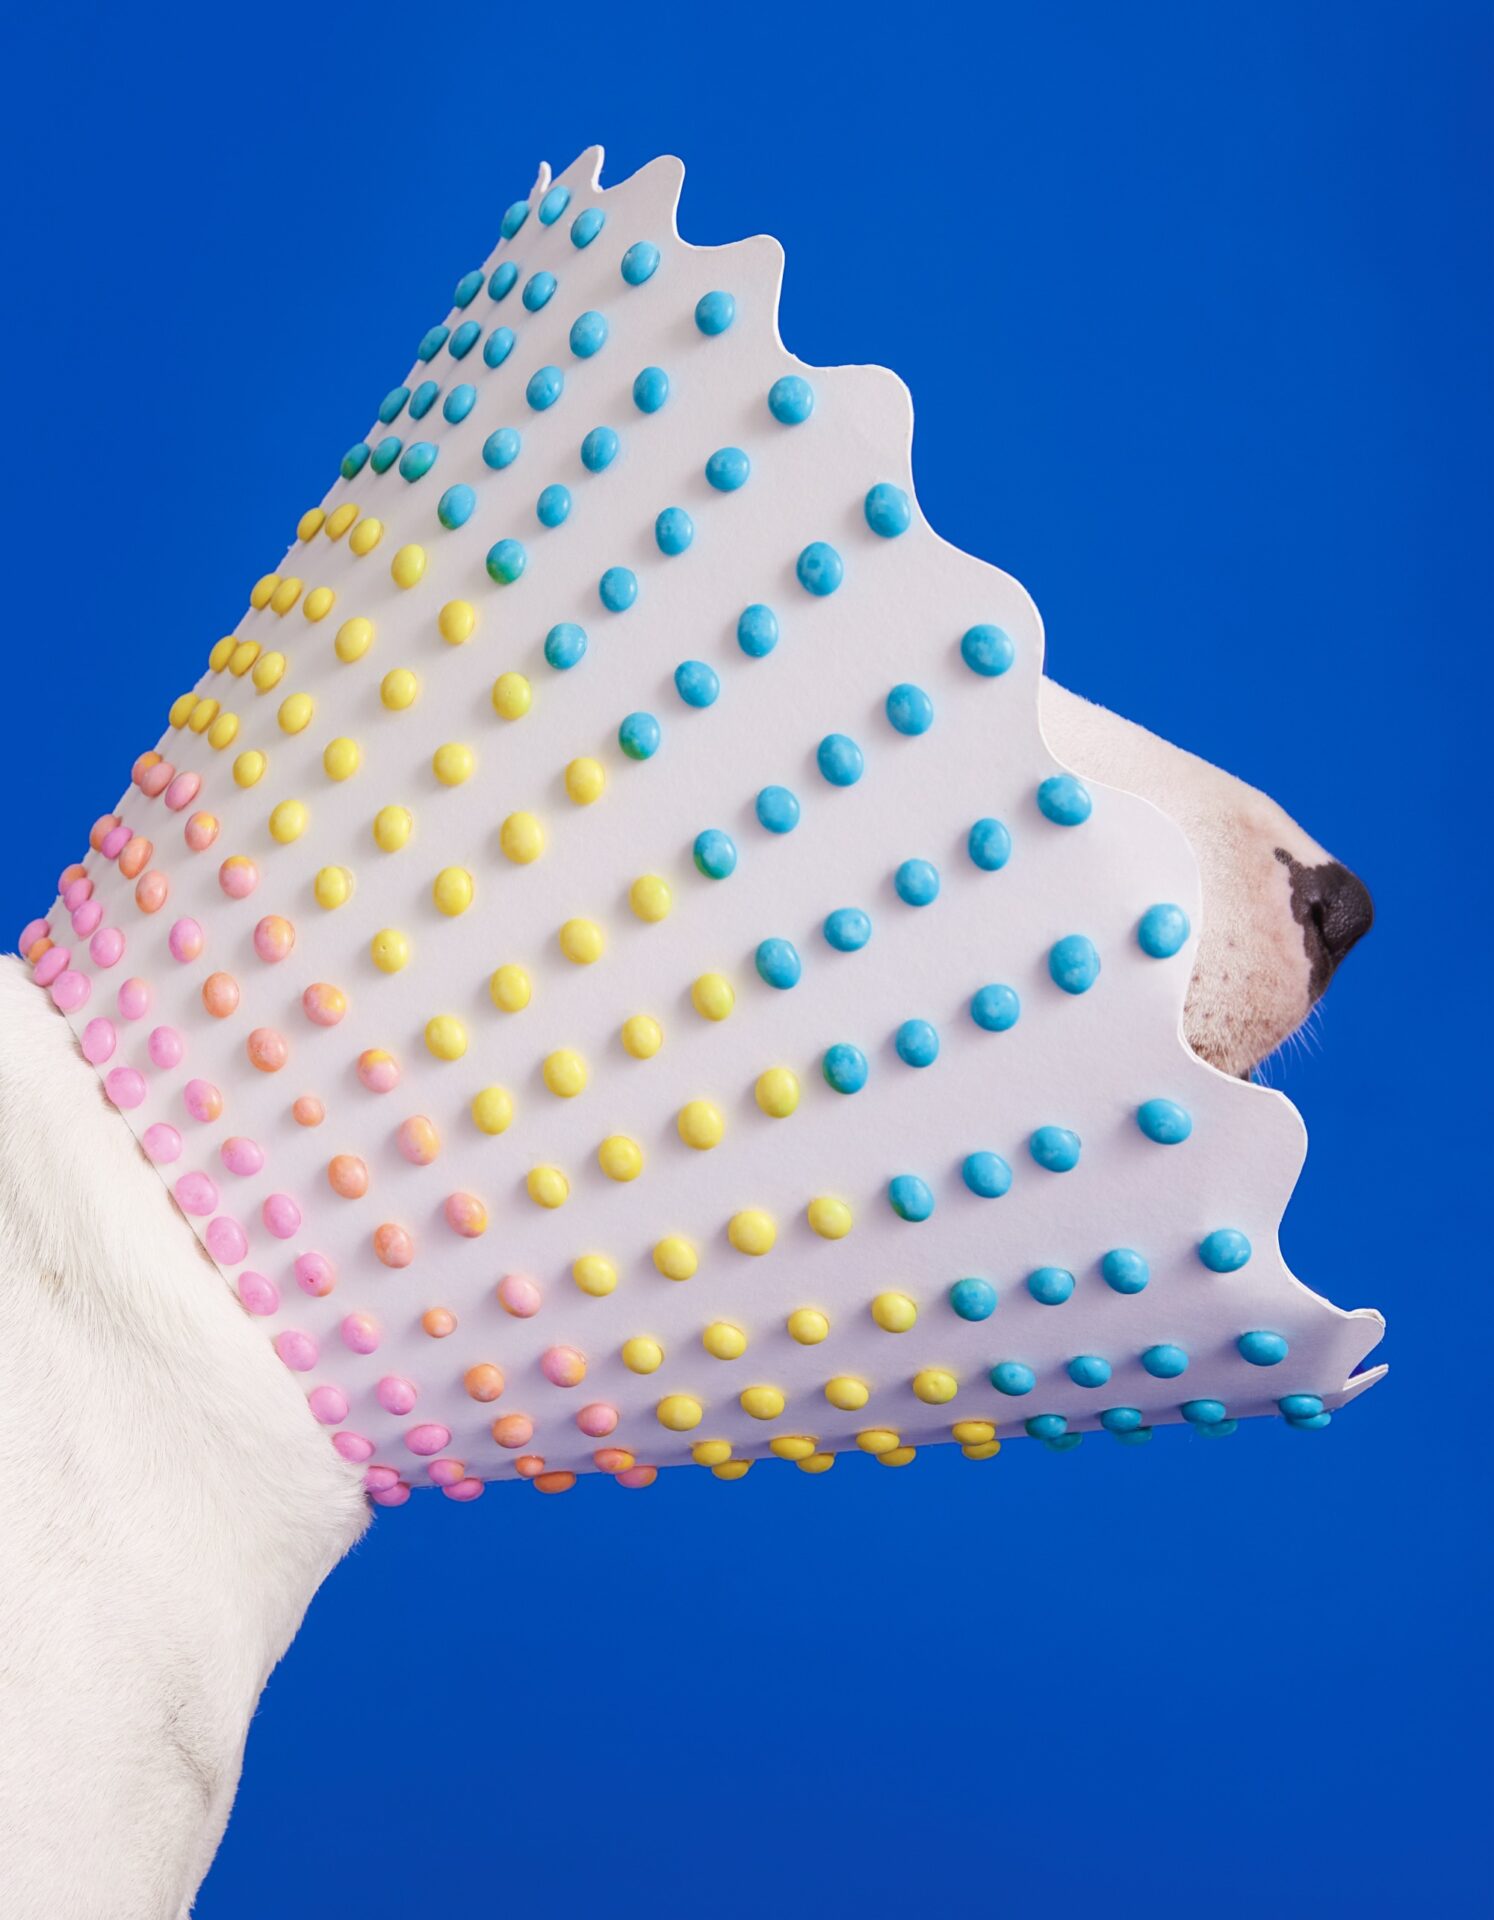 colorful dots cover a white cone worn by a dog with just its nose sticking out. the photo is on a bright blue background